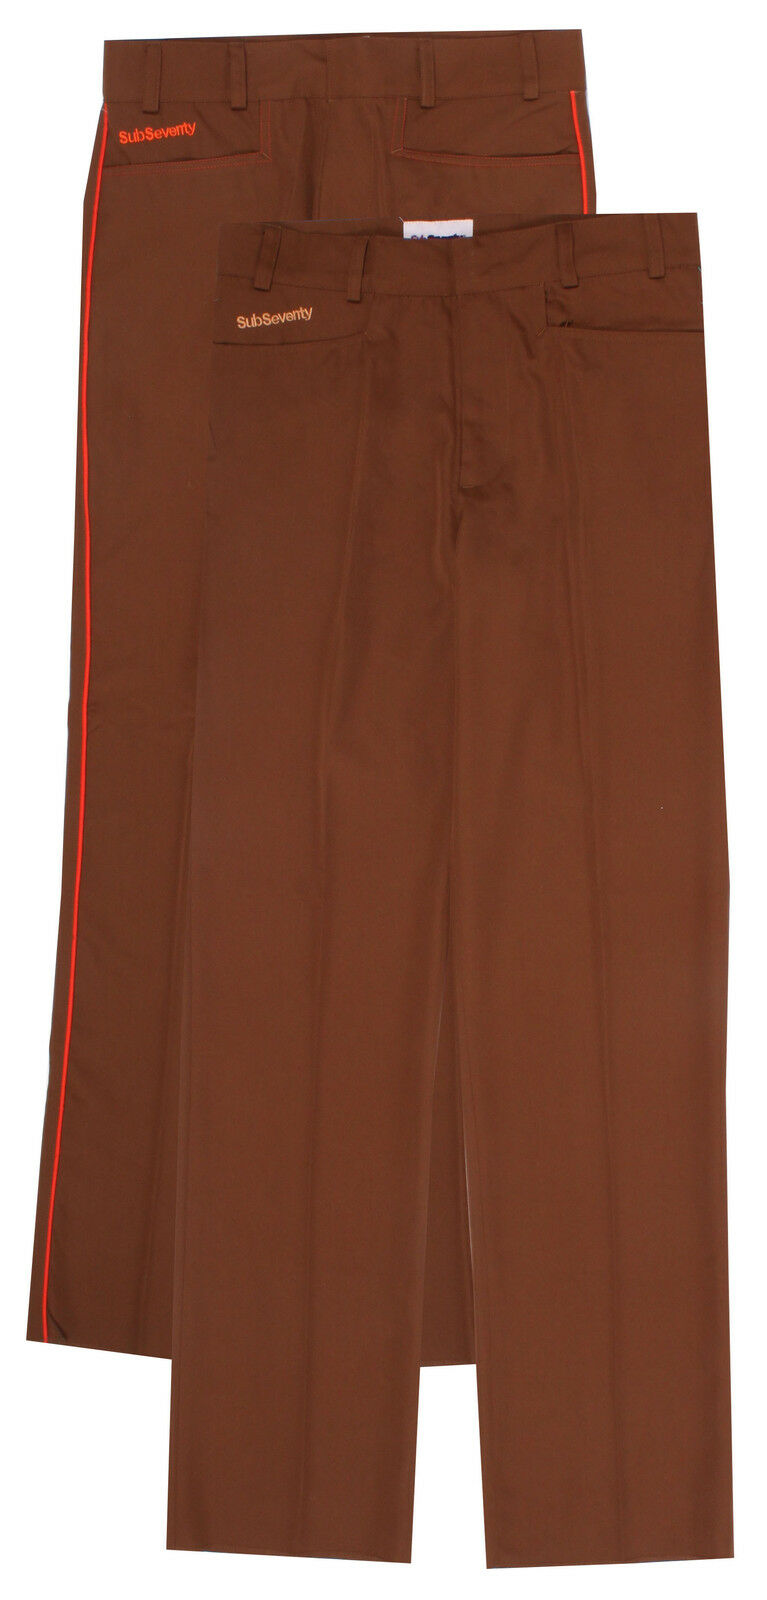 SUB70 Tour SubSeventy Mens Plain / Piping Brown Performance Golf Trousers